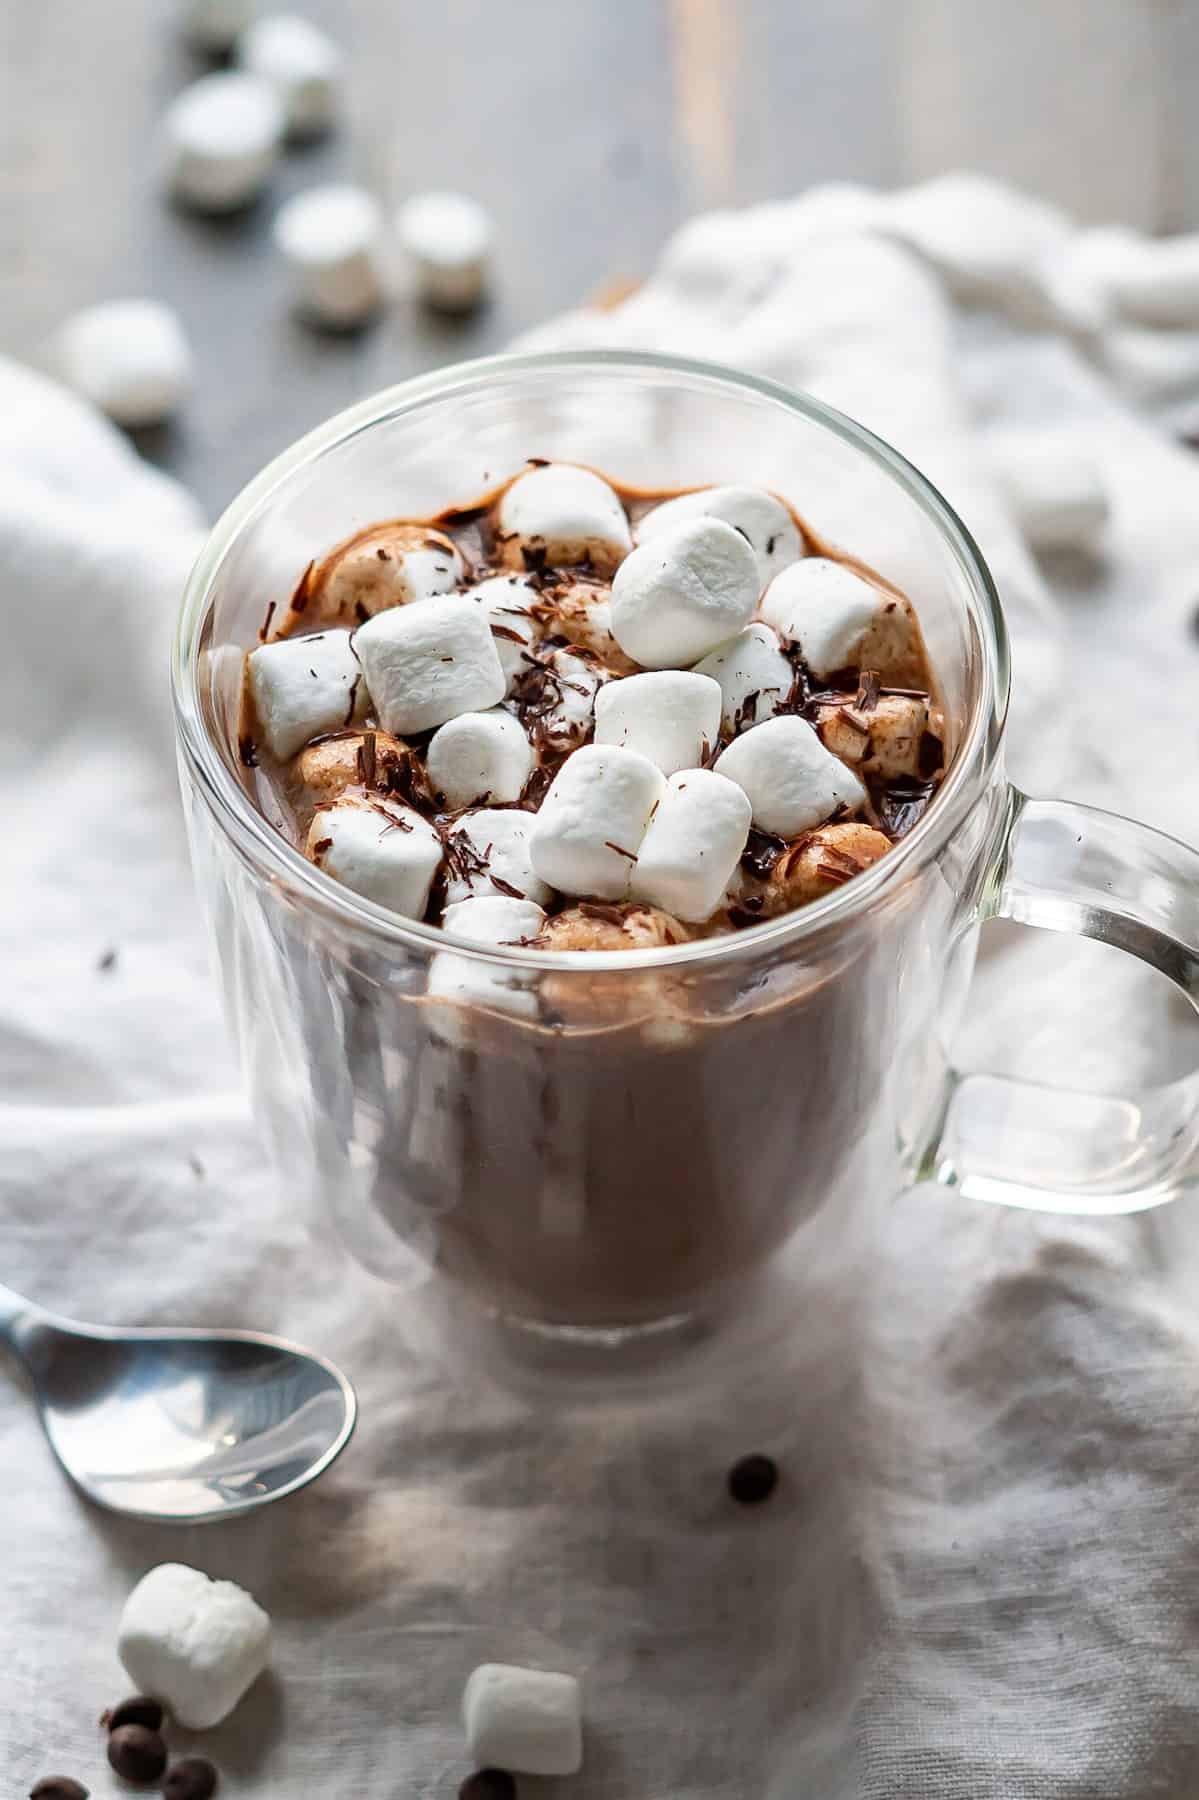 A clear glass mug with microwaved hot chocolate topped with mini marshmallows and chocolate shavings.